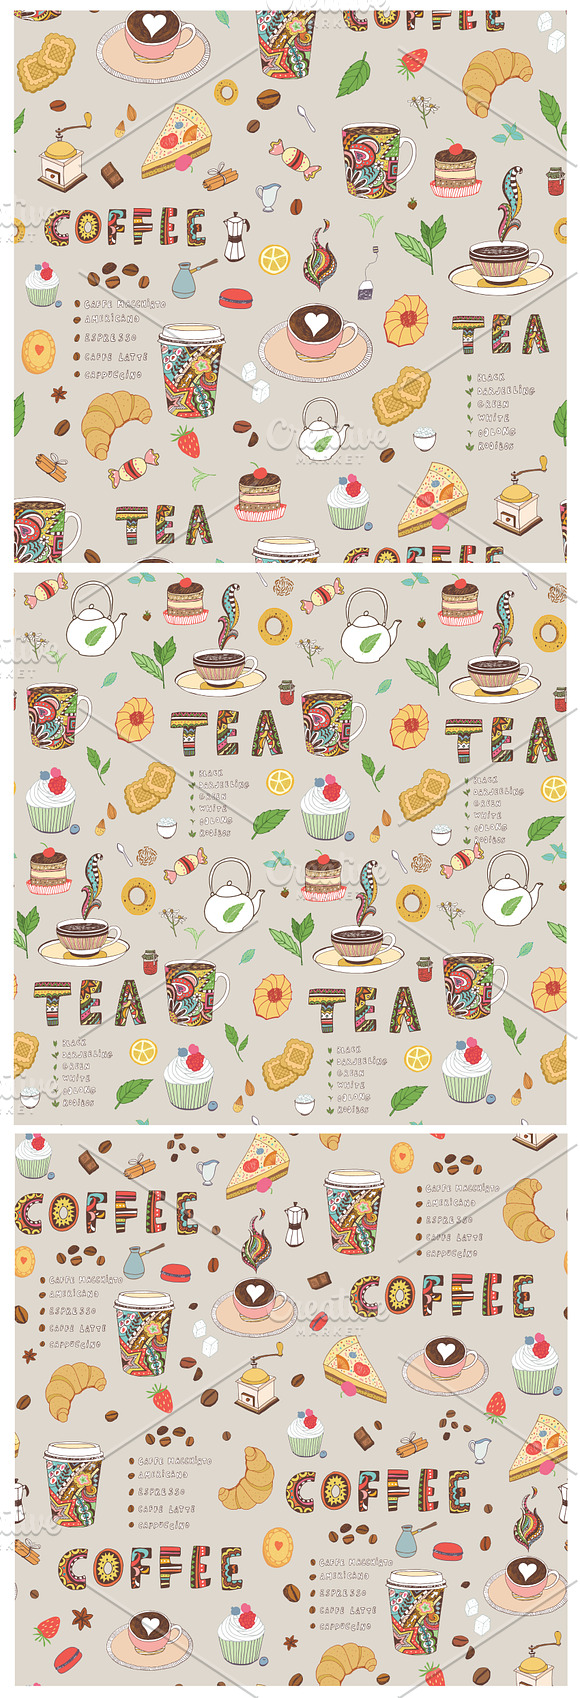 Coffee vs Tea in Patterns - product preview 4